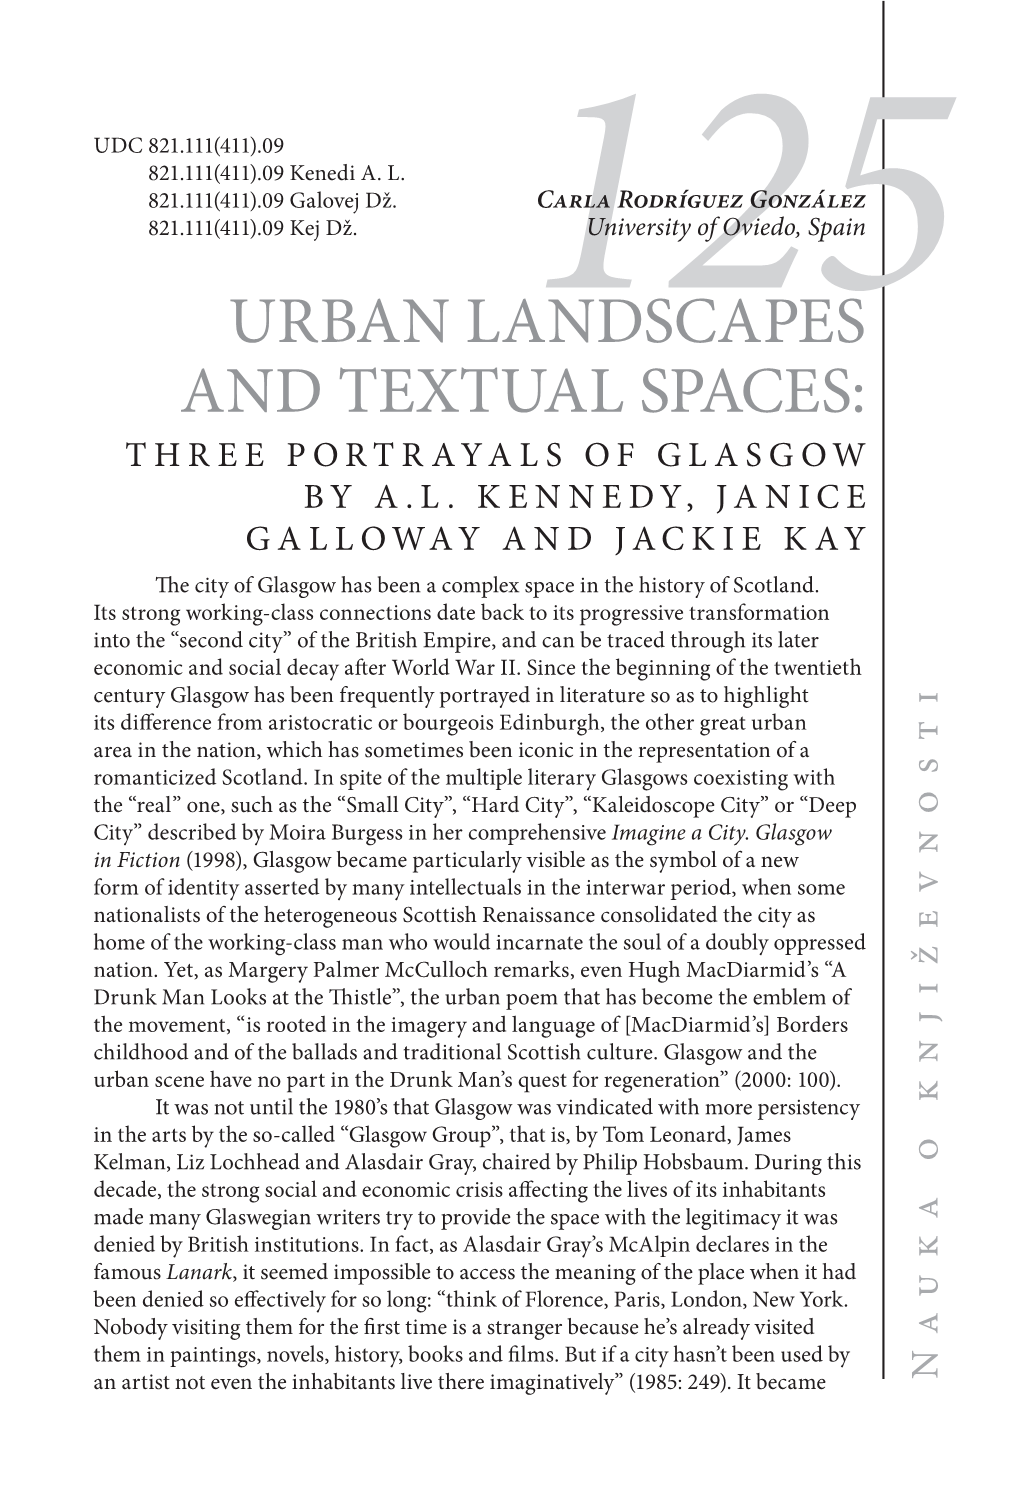 Urban Landscapes and Textual Spaces